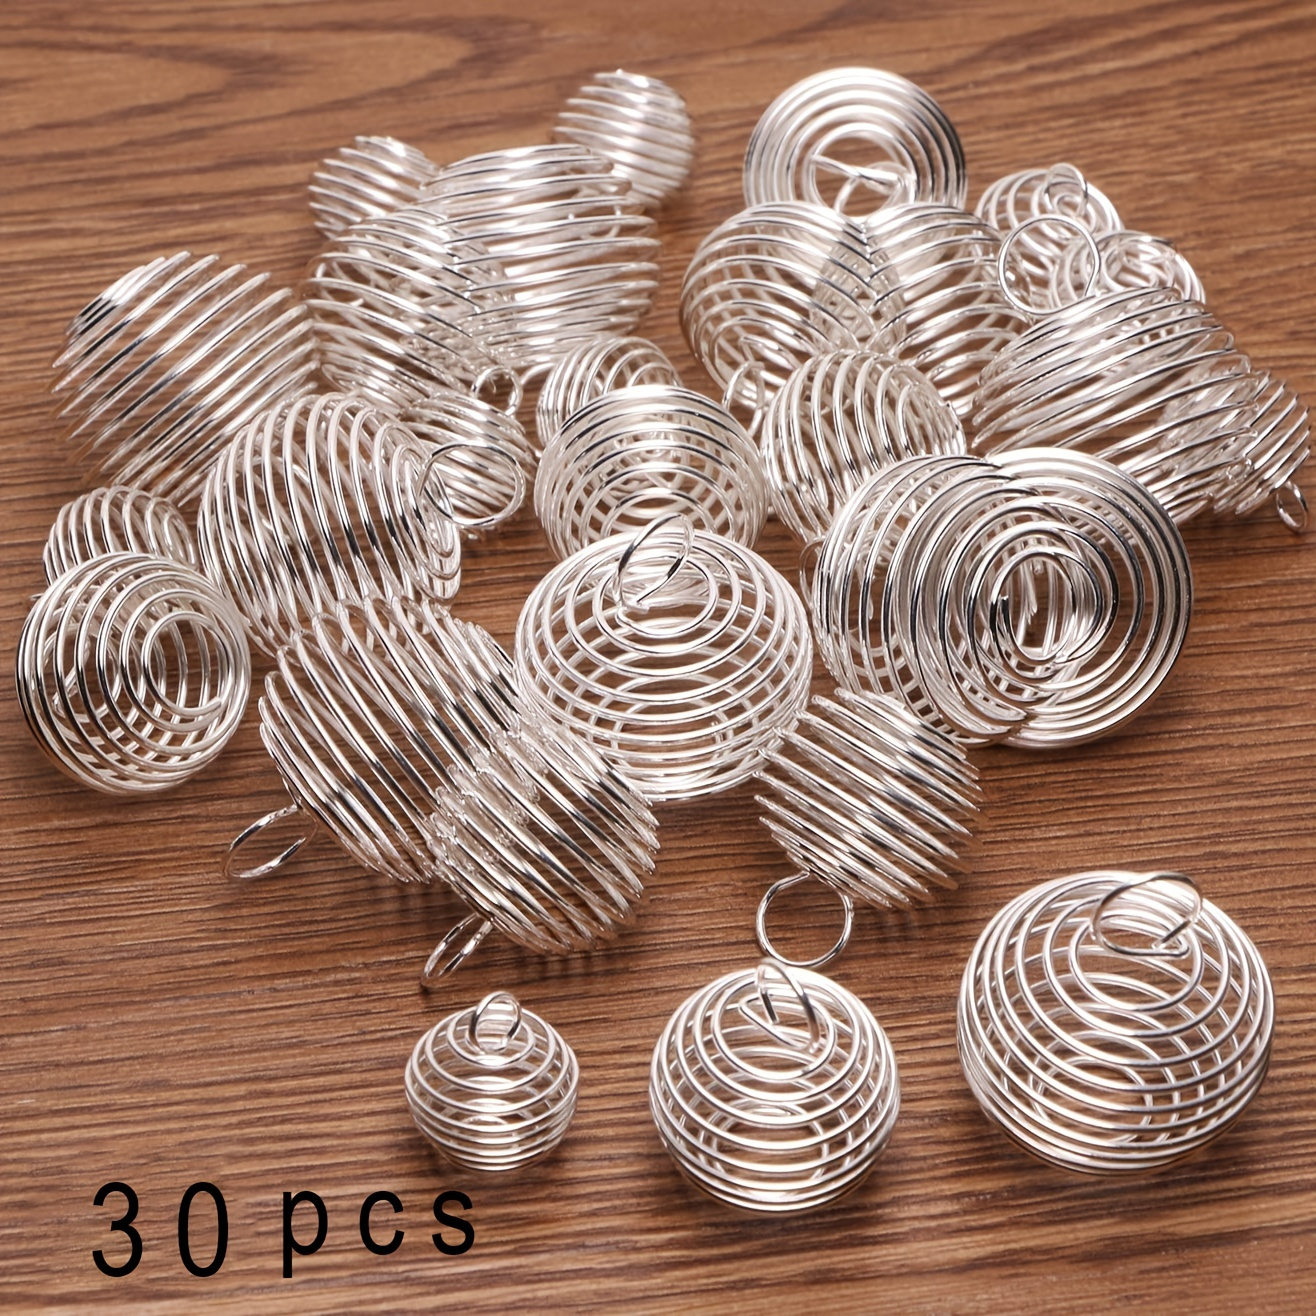 

30pcs Spiral Bead Cages Pendants, 3 Sizes Silver Plated Stone Holder, Necklace Cage Pendants For Jewelry Making Diy Crafting